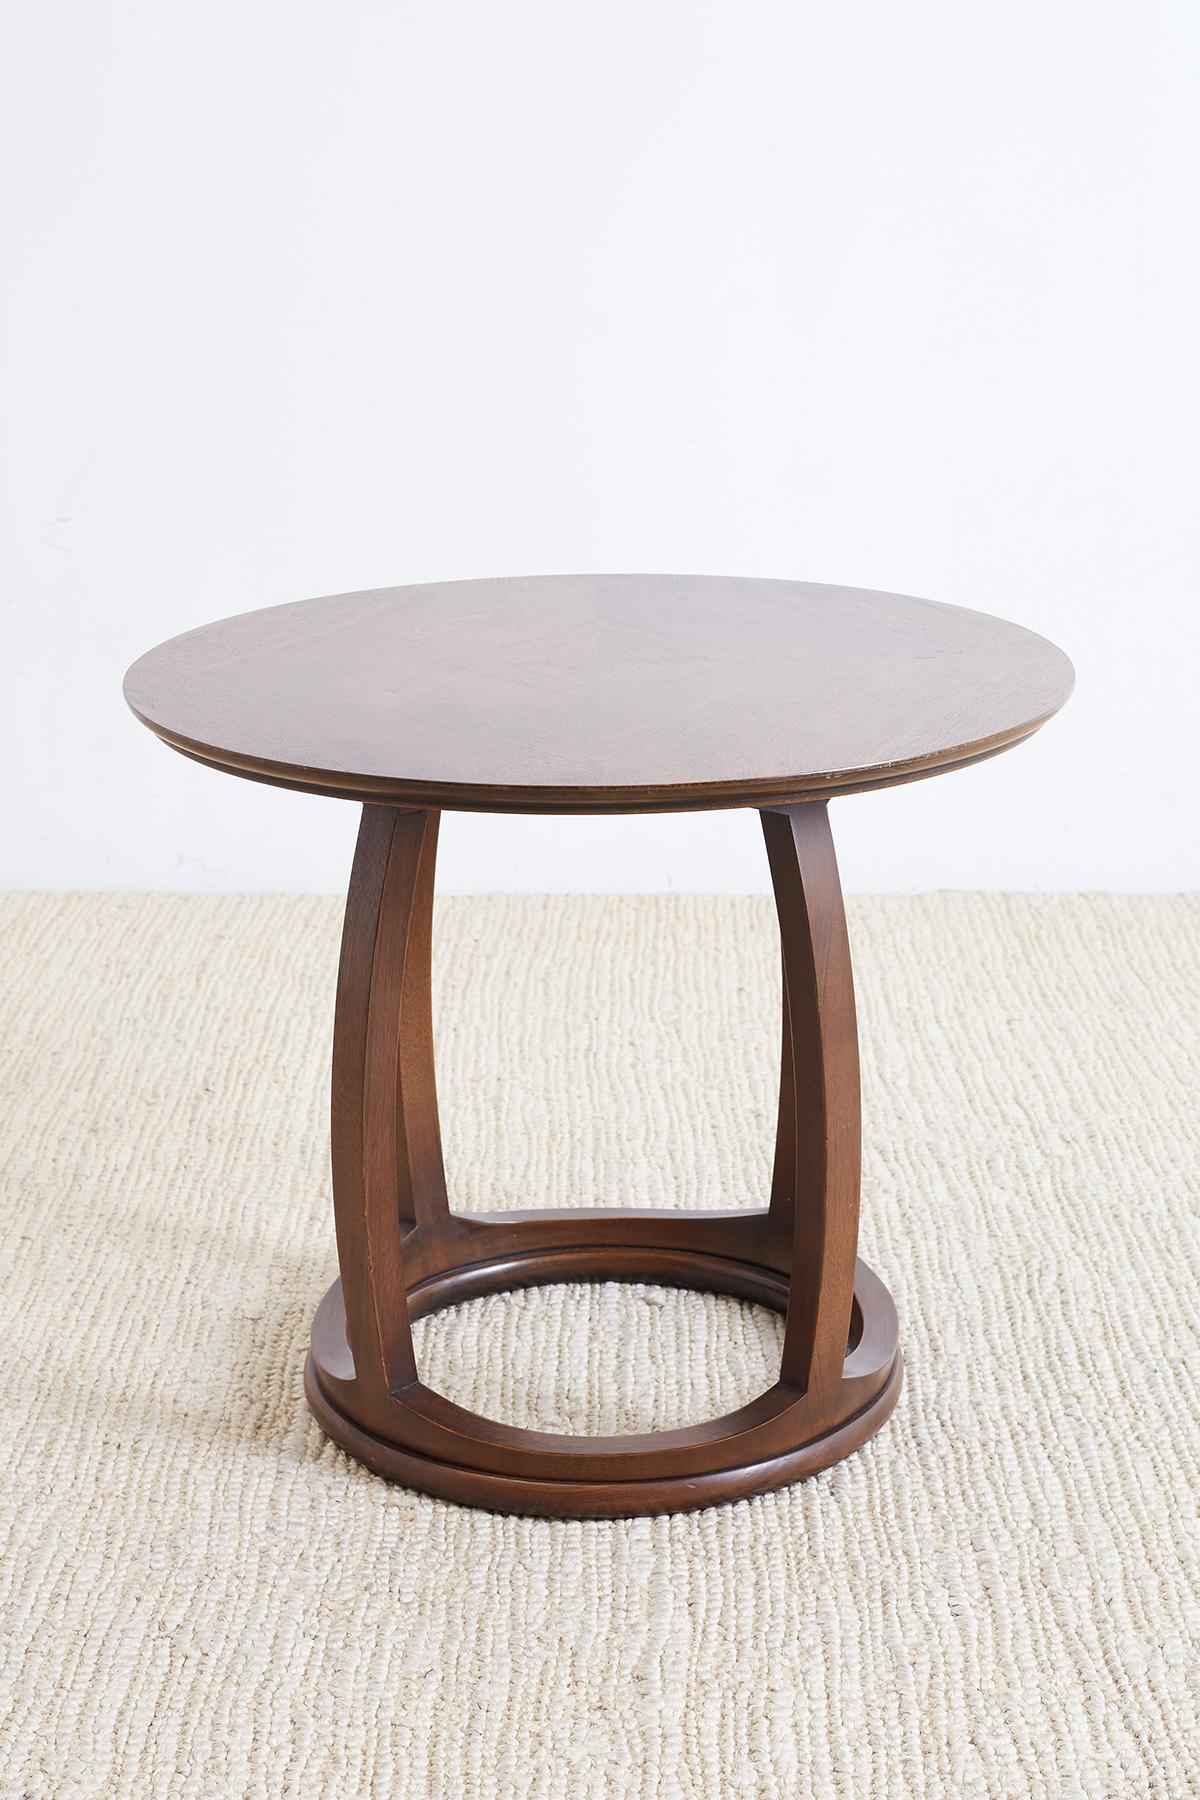 Handsome mahogany round side table, drink table or tabouret having a round top and a drum shaped base. The table has a beautiful match veneer of mahogany laid in a geometric form. Supported by curved legs with a rind shaped stretcher on the bottom.
